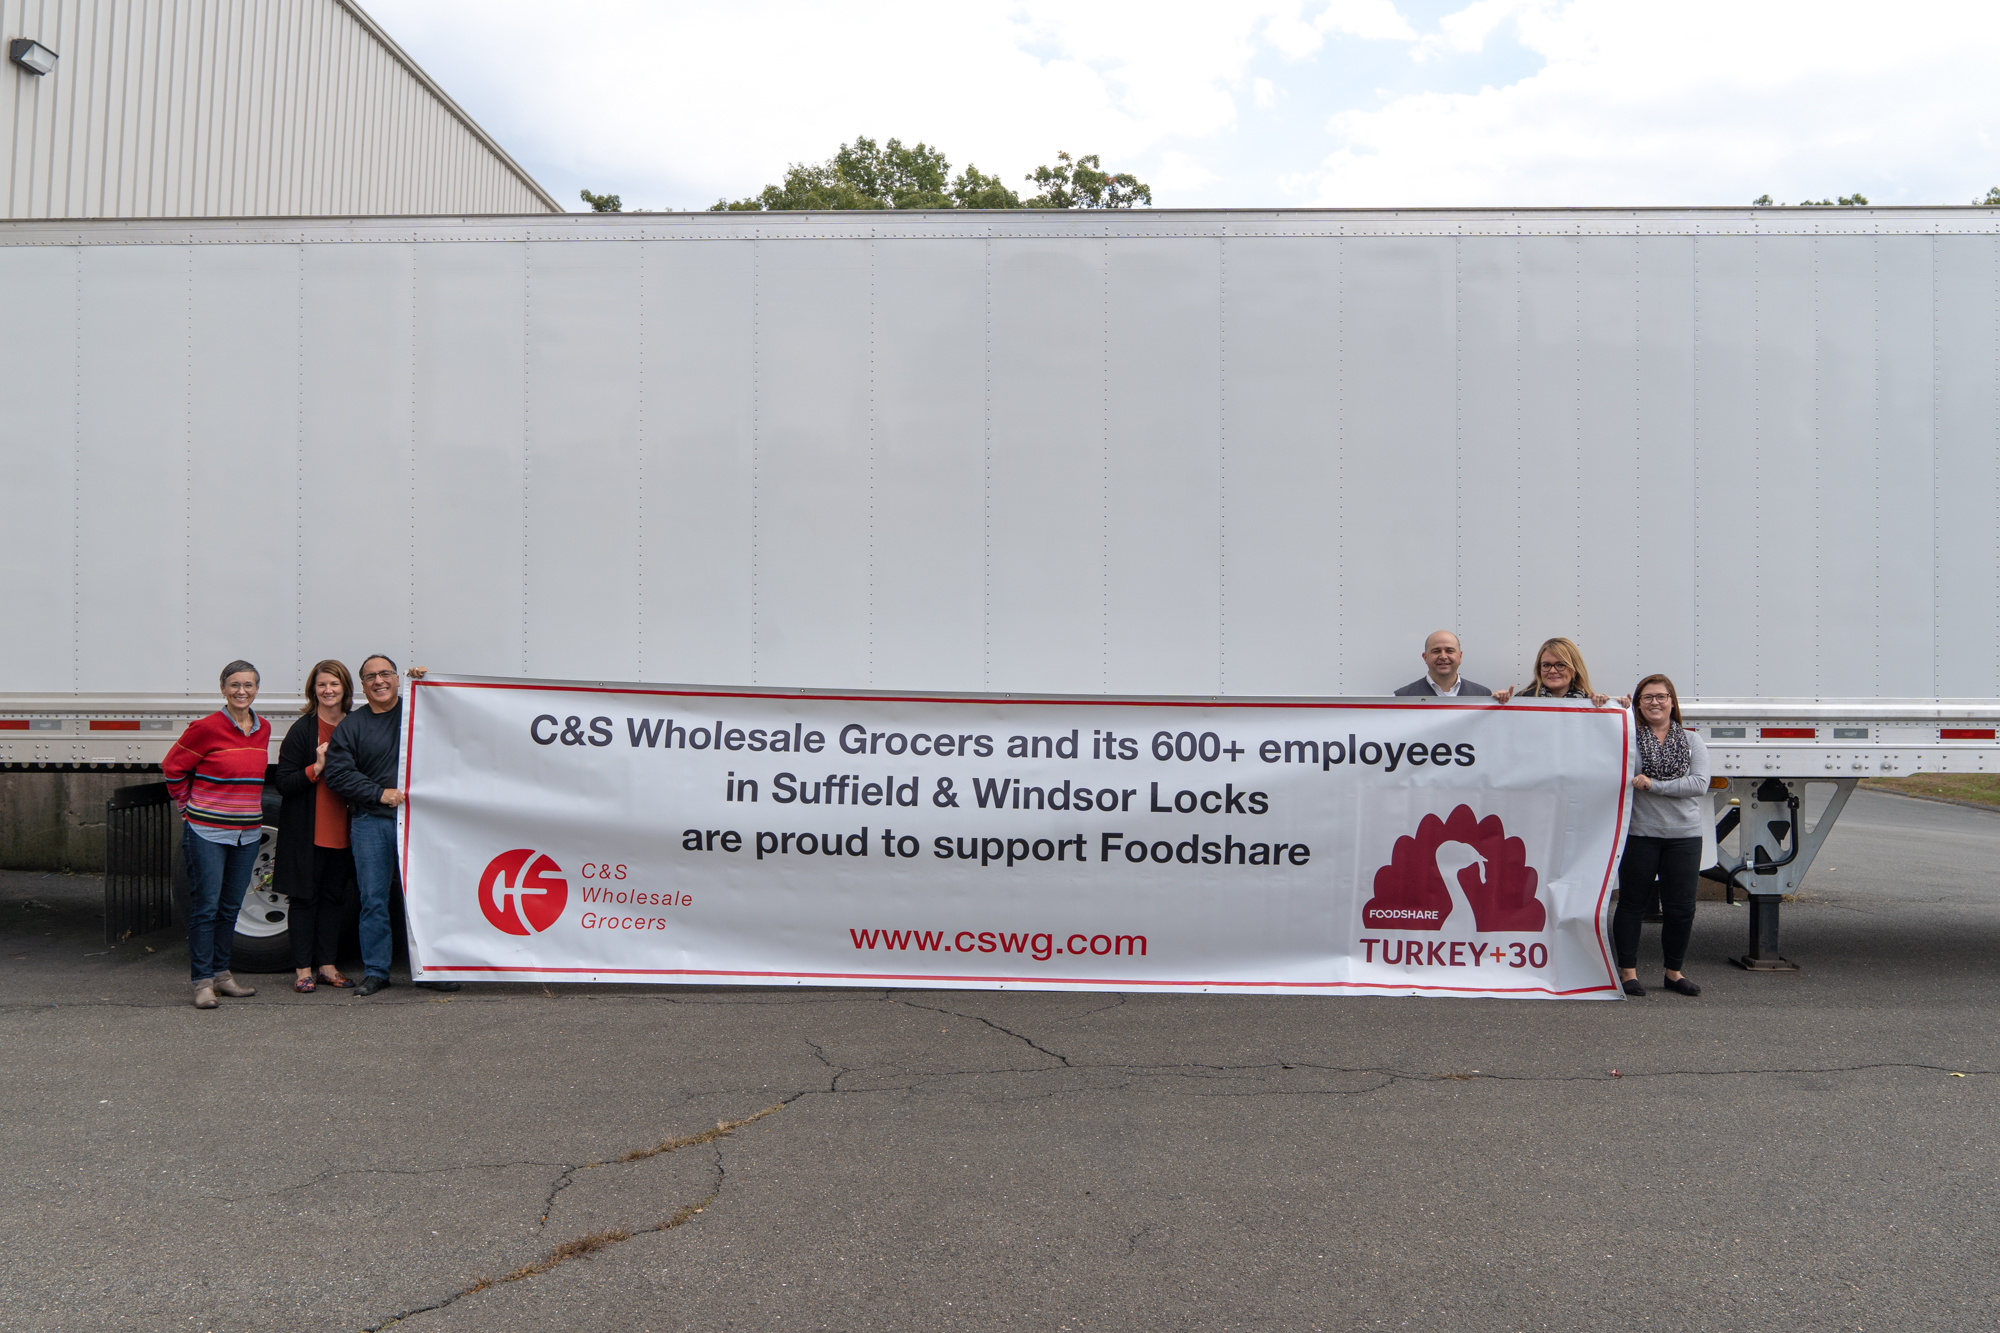 The C&S Wholesale Grocers Family of Companies made an annual donation of more than 8K turkeys to help families in need during the holidays.